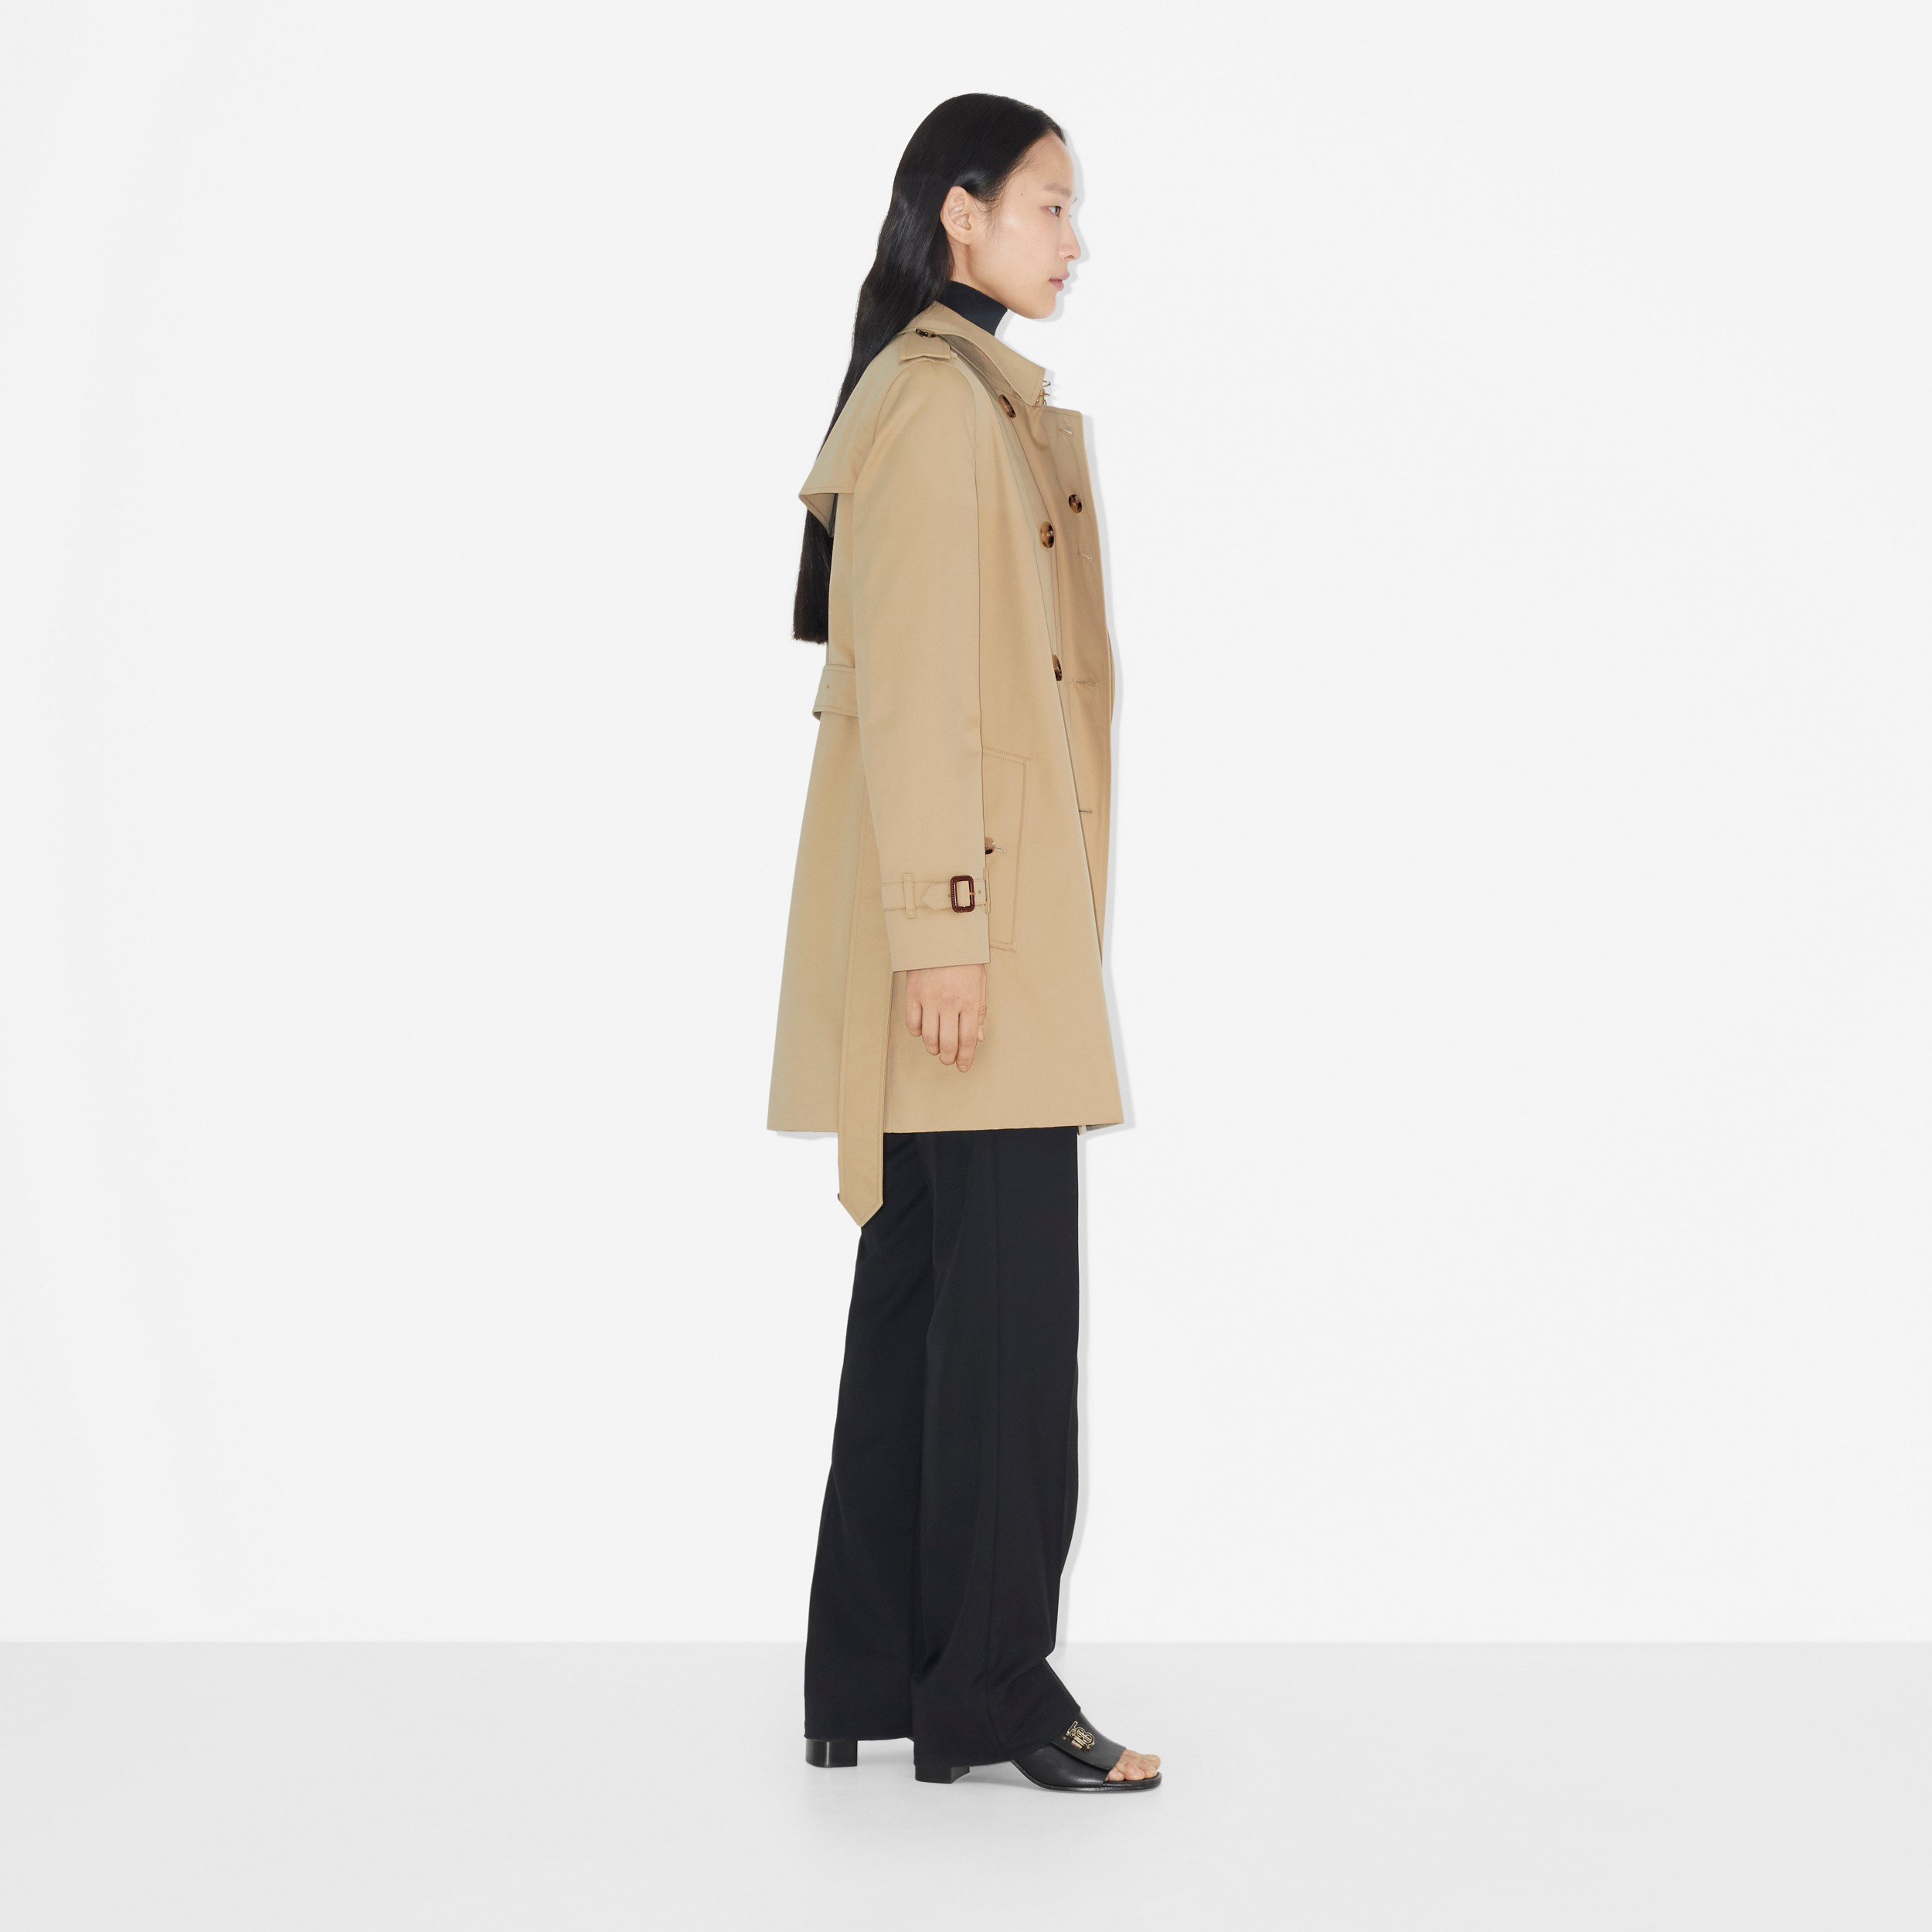 Kensington - Trench coat Heritage - Curto (Mel) - Mulheres | Burberry® oficial - 3